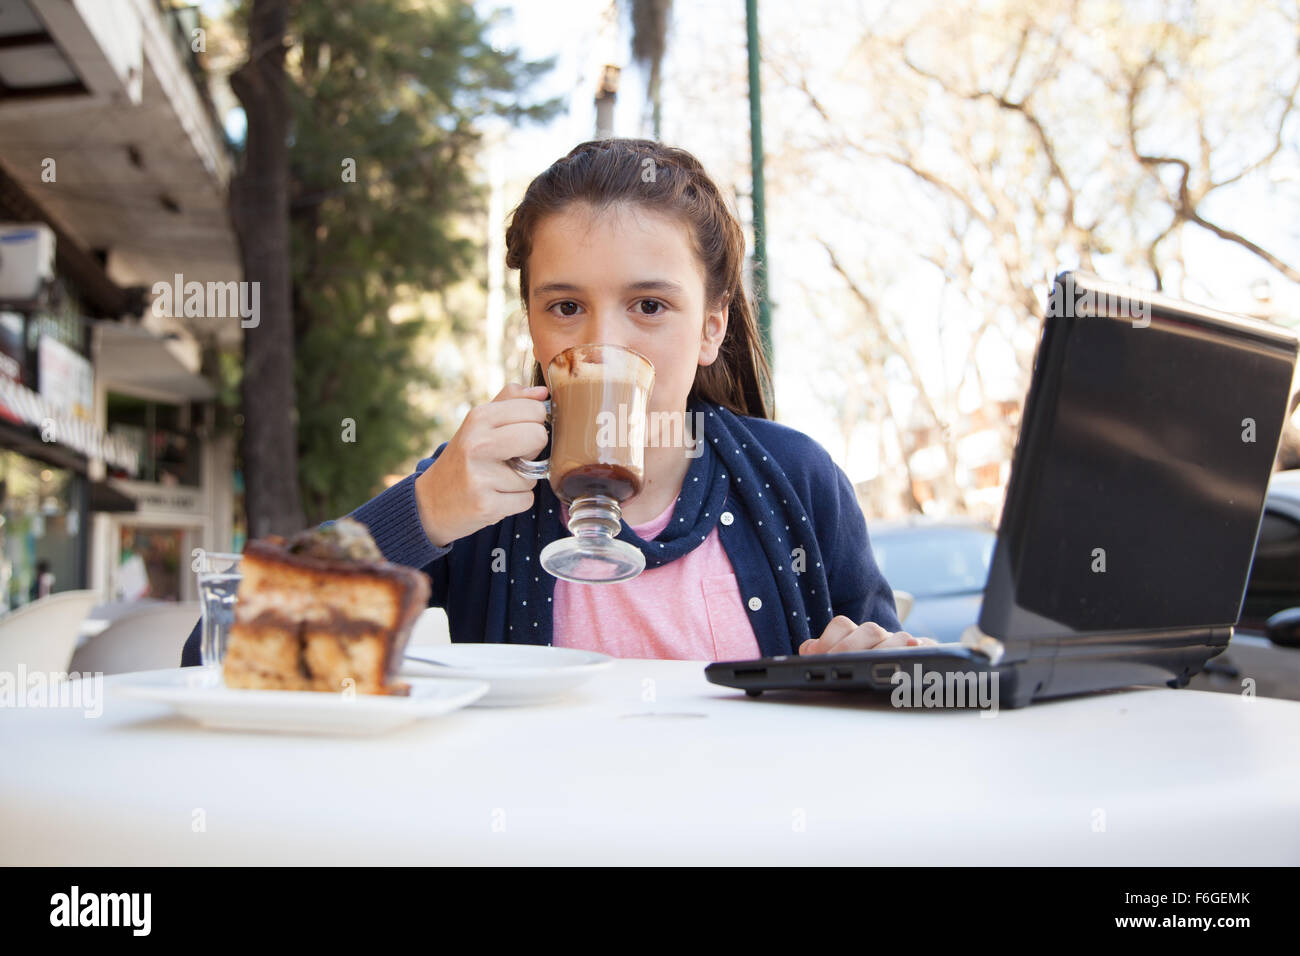 Girl using the computer while she drinks coffee Stock Photo